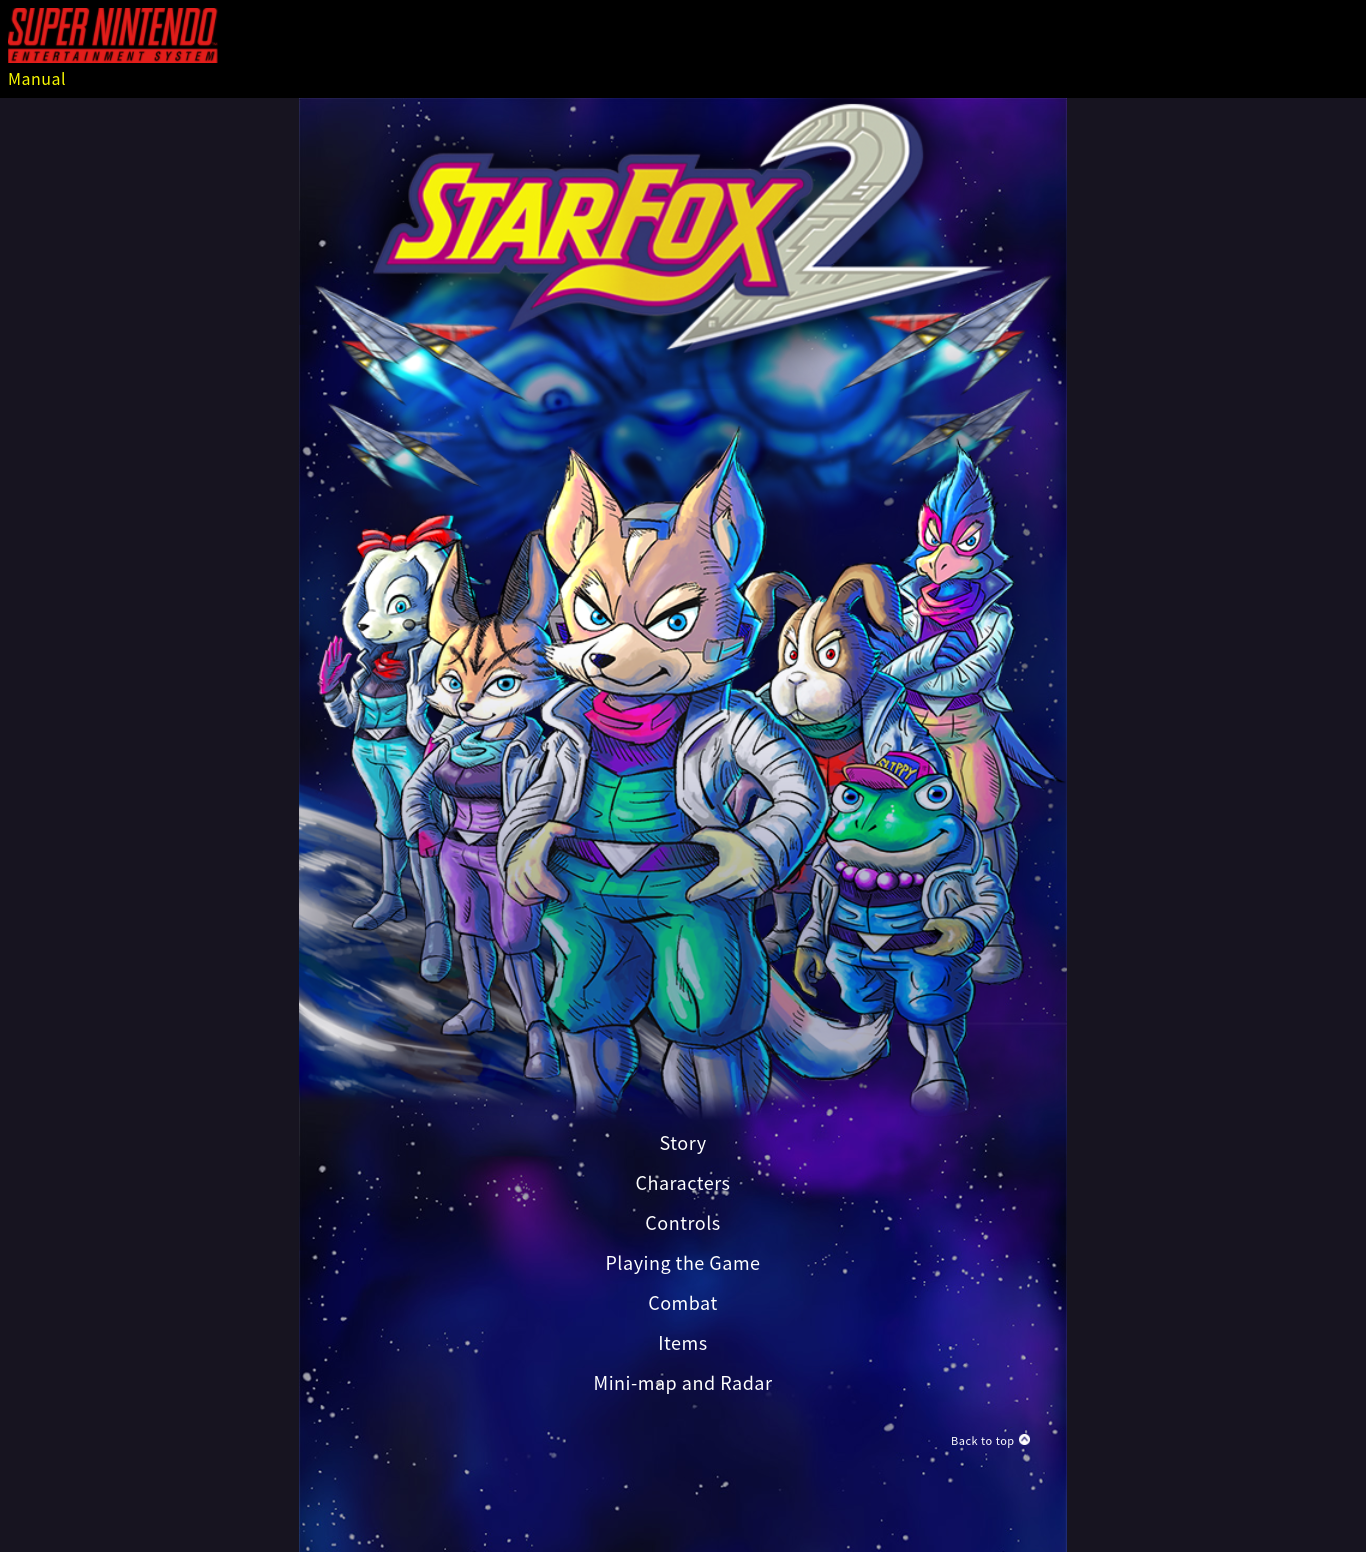 Star Fox 2 manual (SNES CLASSIC EDITION) - Game Manuals Discussion